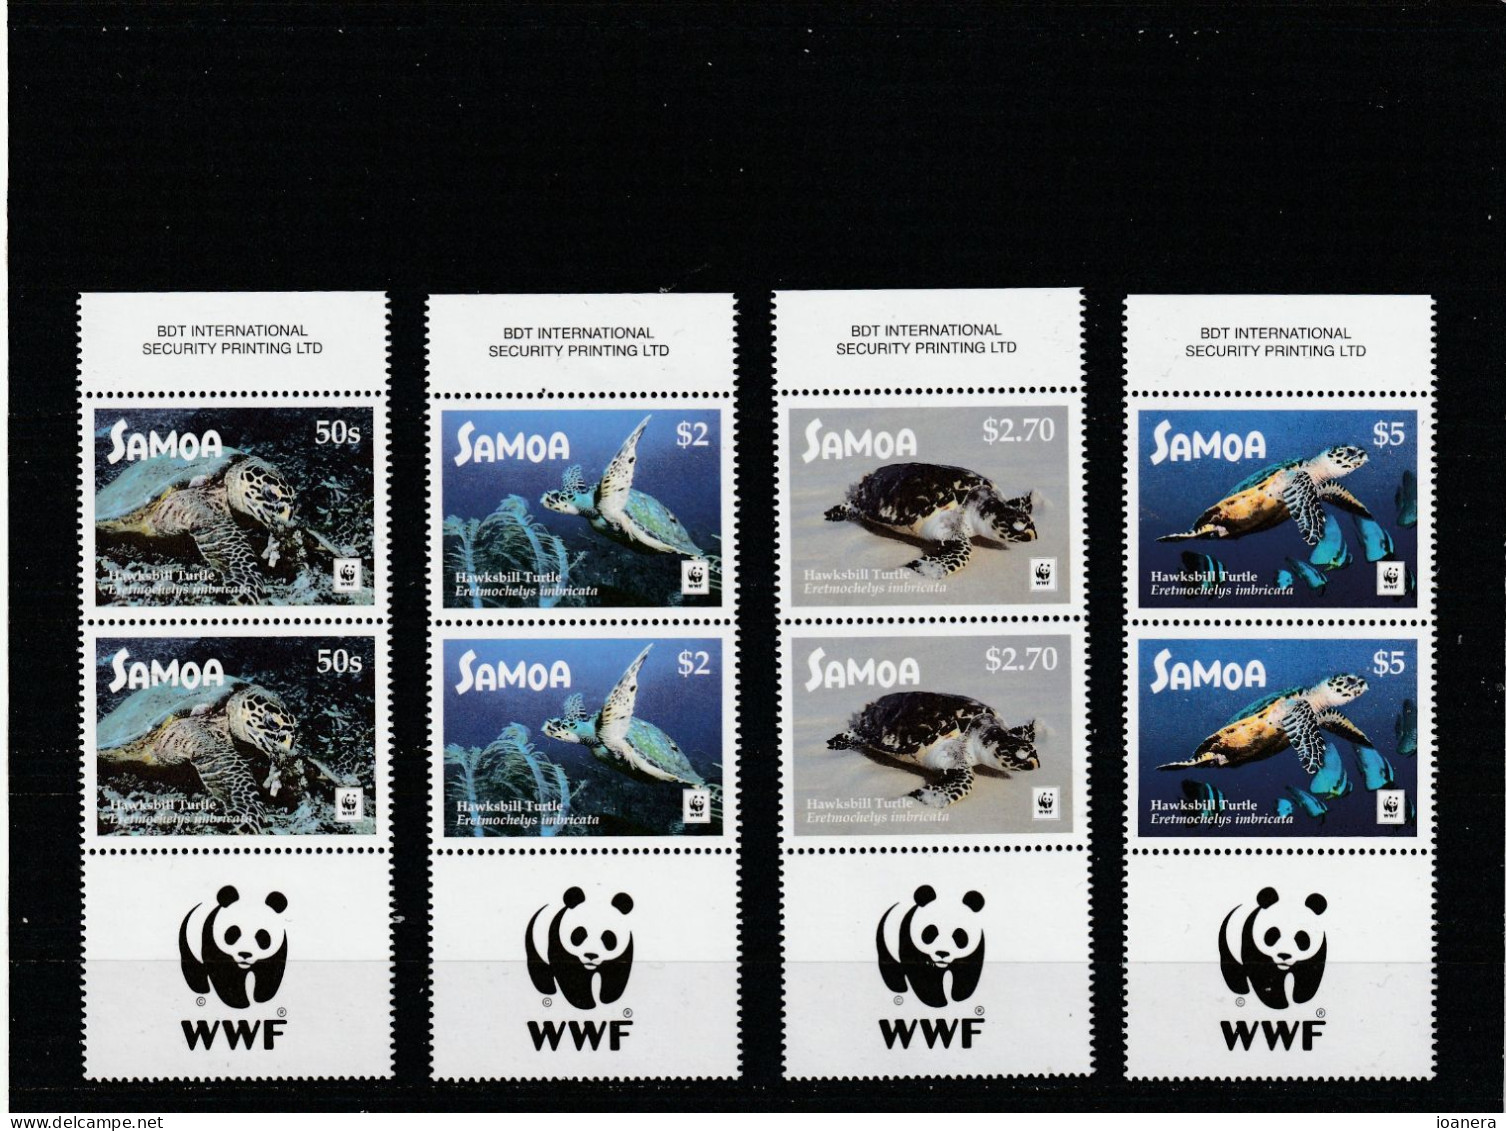 Samoa 2016 - WWF,Fauna,Reptiles,Turtles,series 4 Values And Serie 4 Valies With,vignette,perforated,MNH,Mi.Bl1352-1355KB - Samoa (Staat)